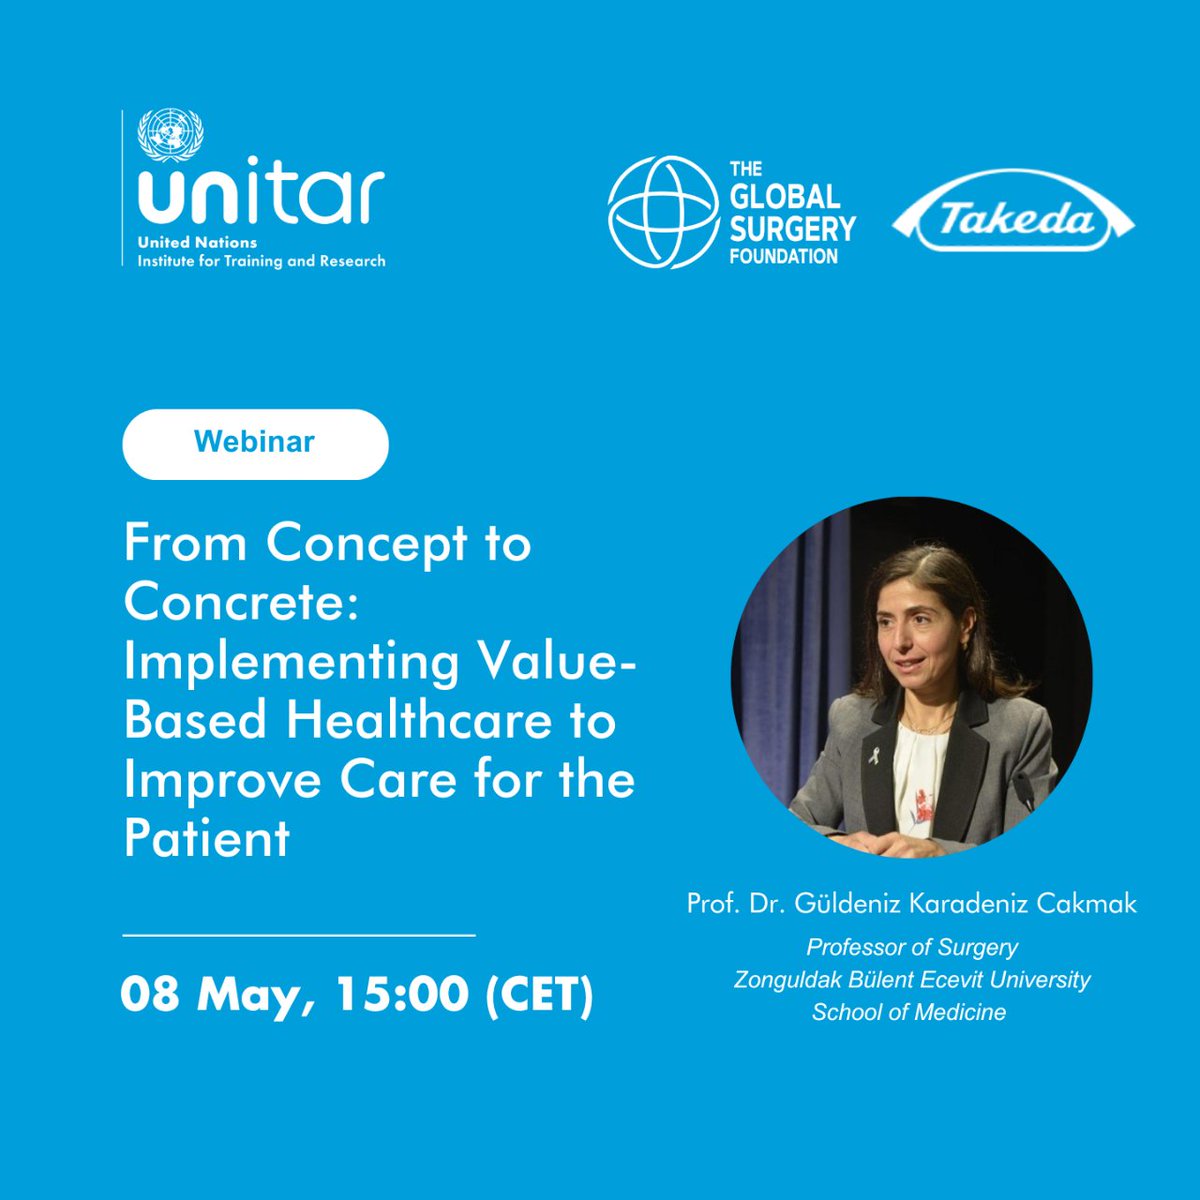 Breast cancer is a key entry point for the implementation of value-based healthcare.

Join our online event to hear from Prof. Dr Cakmak from @beunedutr on implementing VBHC to improve breast cancer surgical care.

📆 8th May, 15:00 CET

Register: globalsurgeryfoundation.org/events/2024/we…